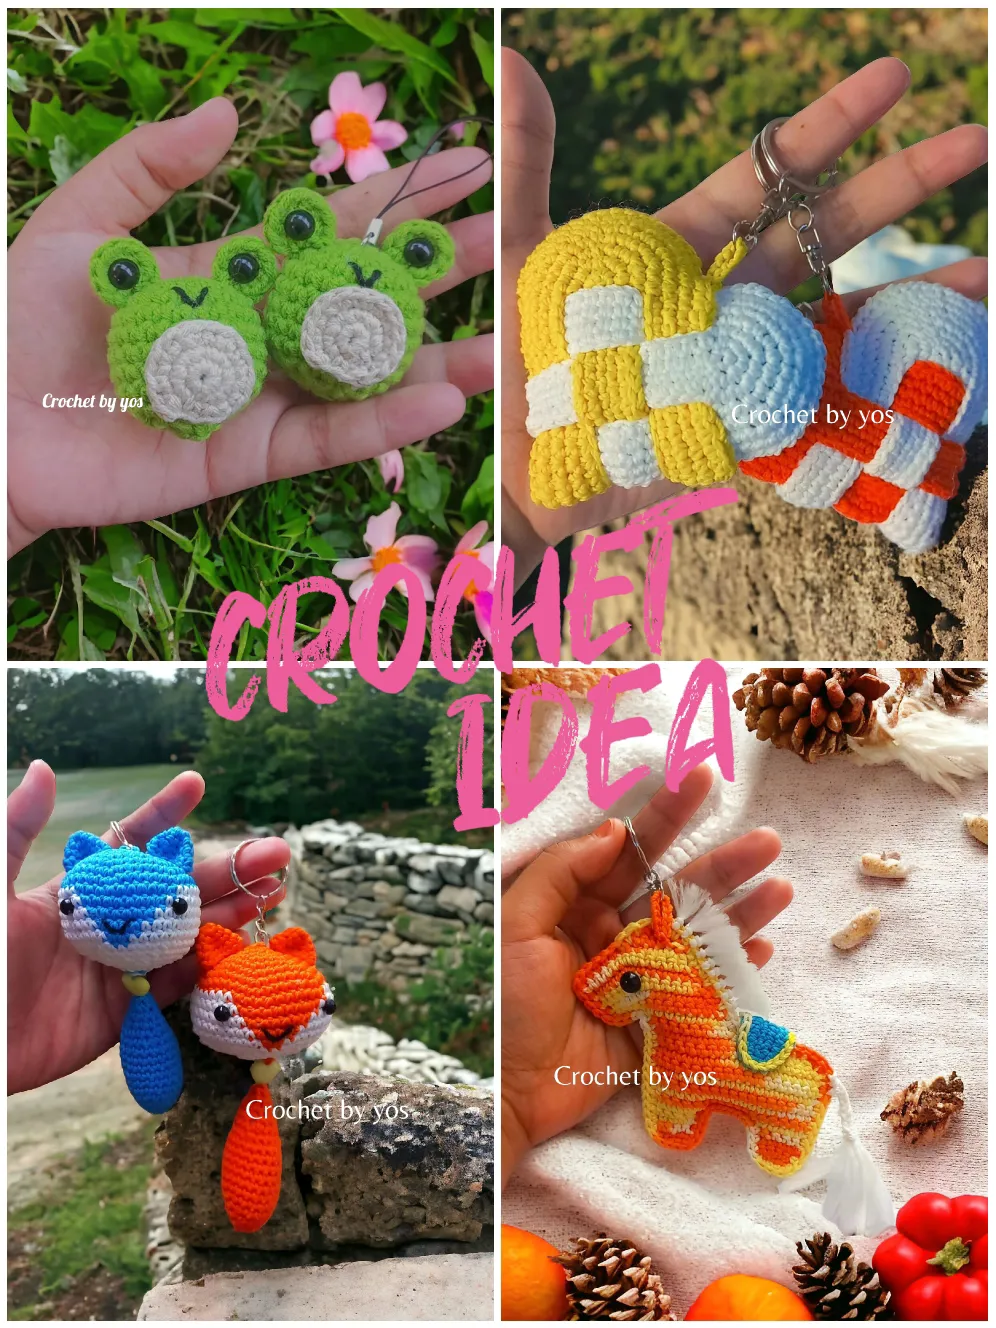 Unique Crochet Ideas🍃, Gallery posted by eva 🌸